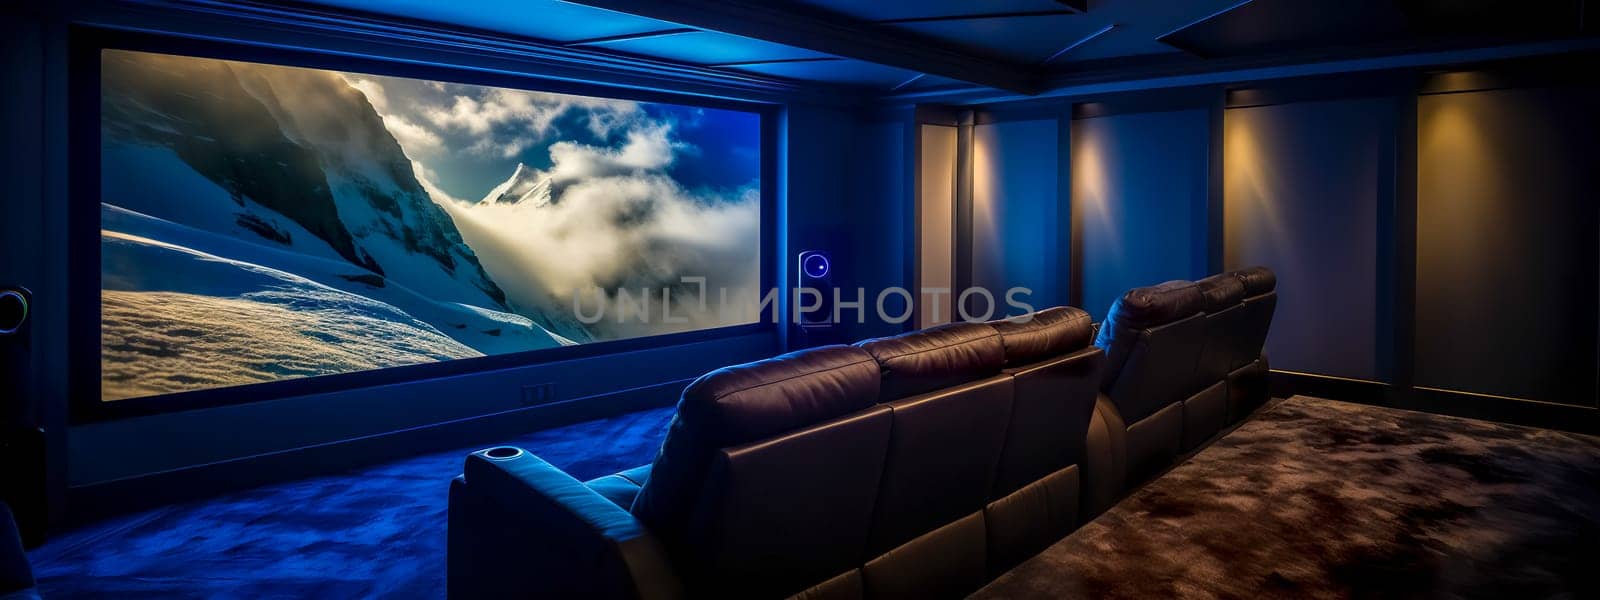 home theater setup with plush leather seating, ambient lighting, and a large projection screen displaying a captivating mountain scene, designed for an immersive viewing experience in a smart home by Edophoto